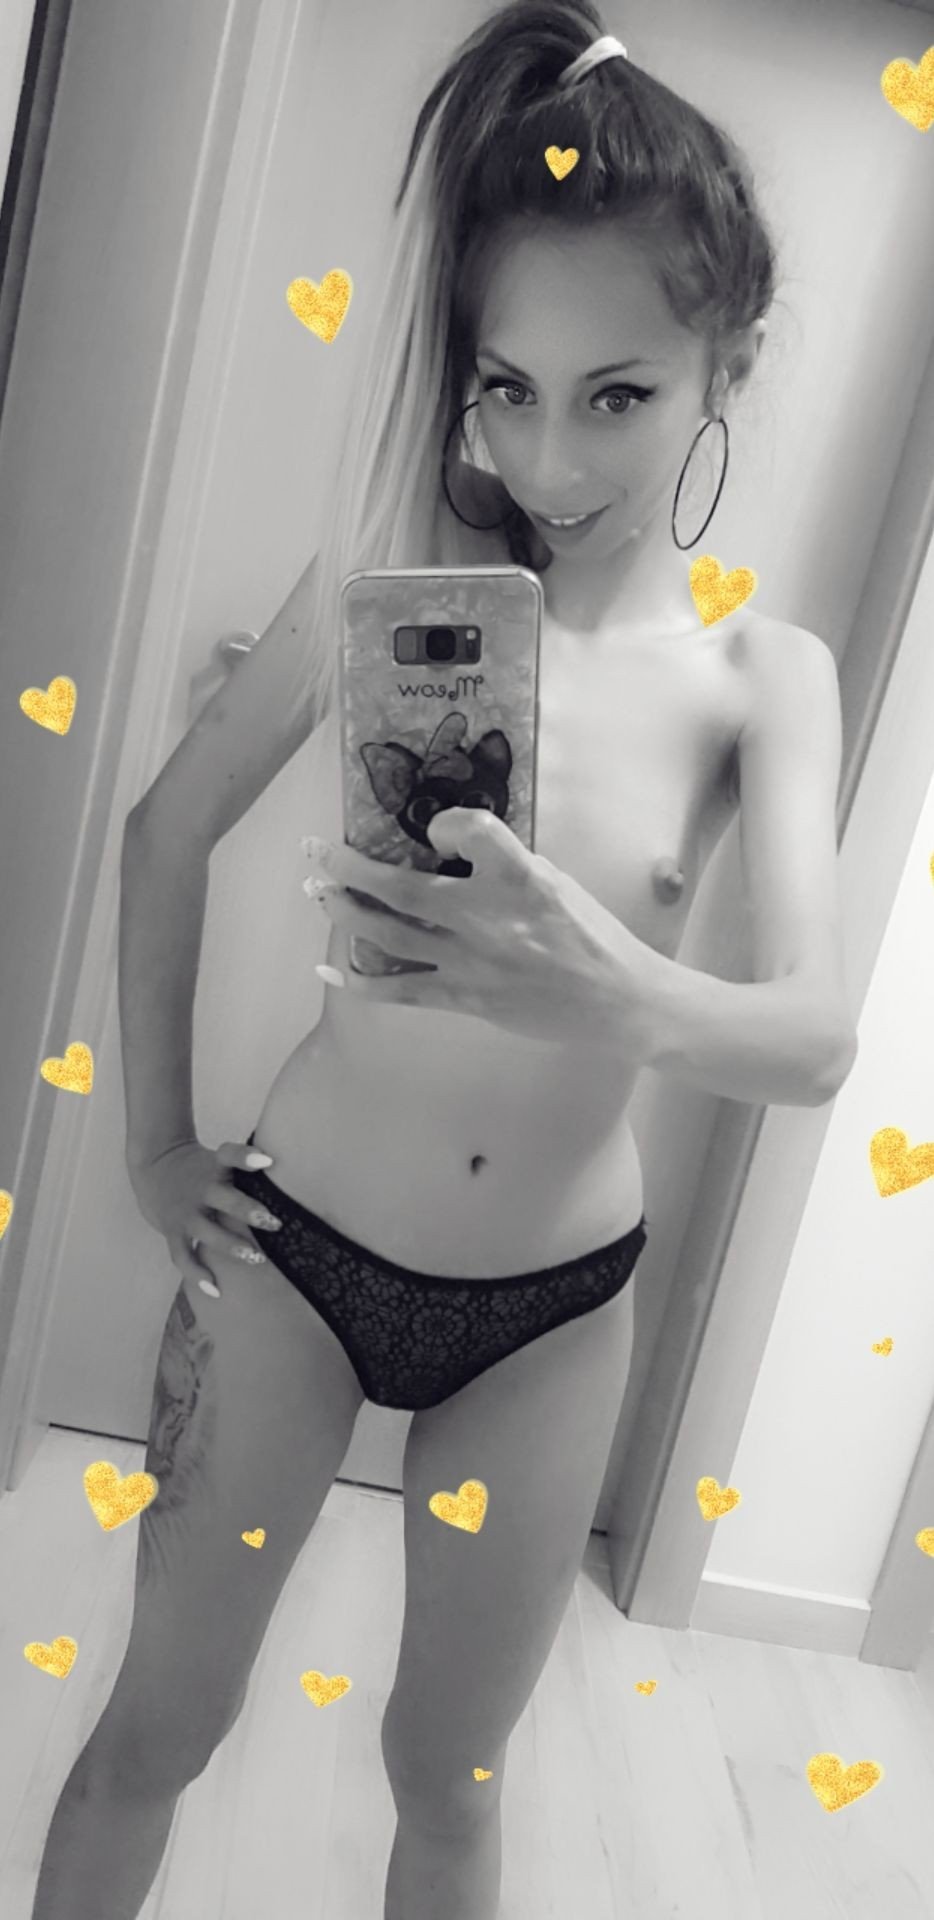 Watch the Photo by CandieCross with the username @CandieCross, who is a star user, posted on July 14, 2019. The post is about the topic Teen. and the text says 'Are you ready too see me online tonight on @ManyVids and #XLOVE ??? #sexy #sweet #online'